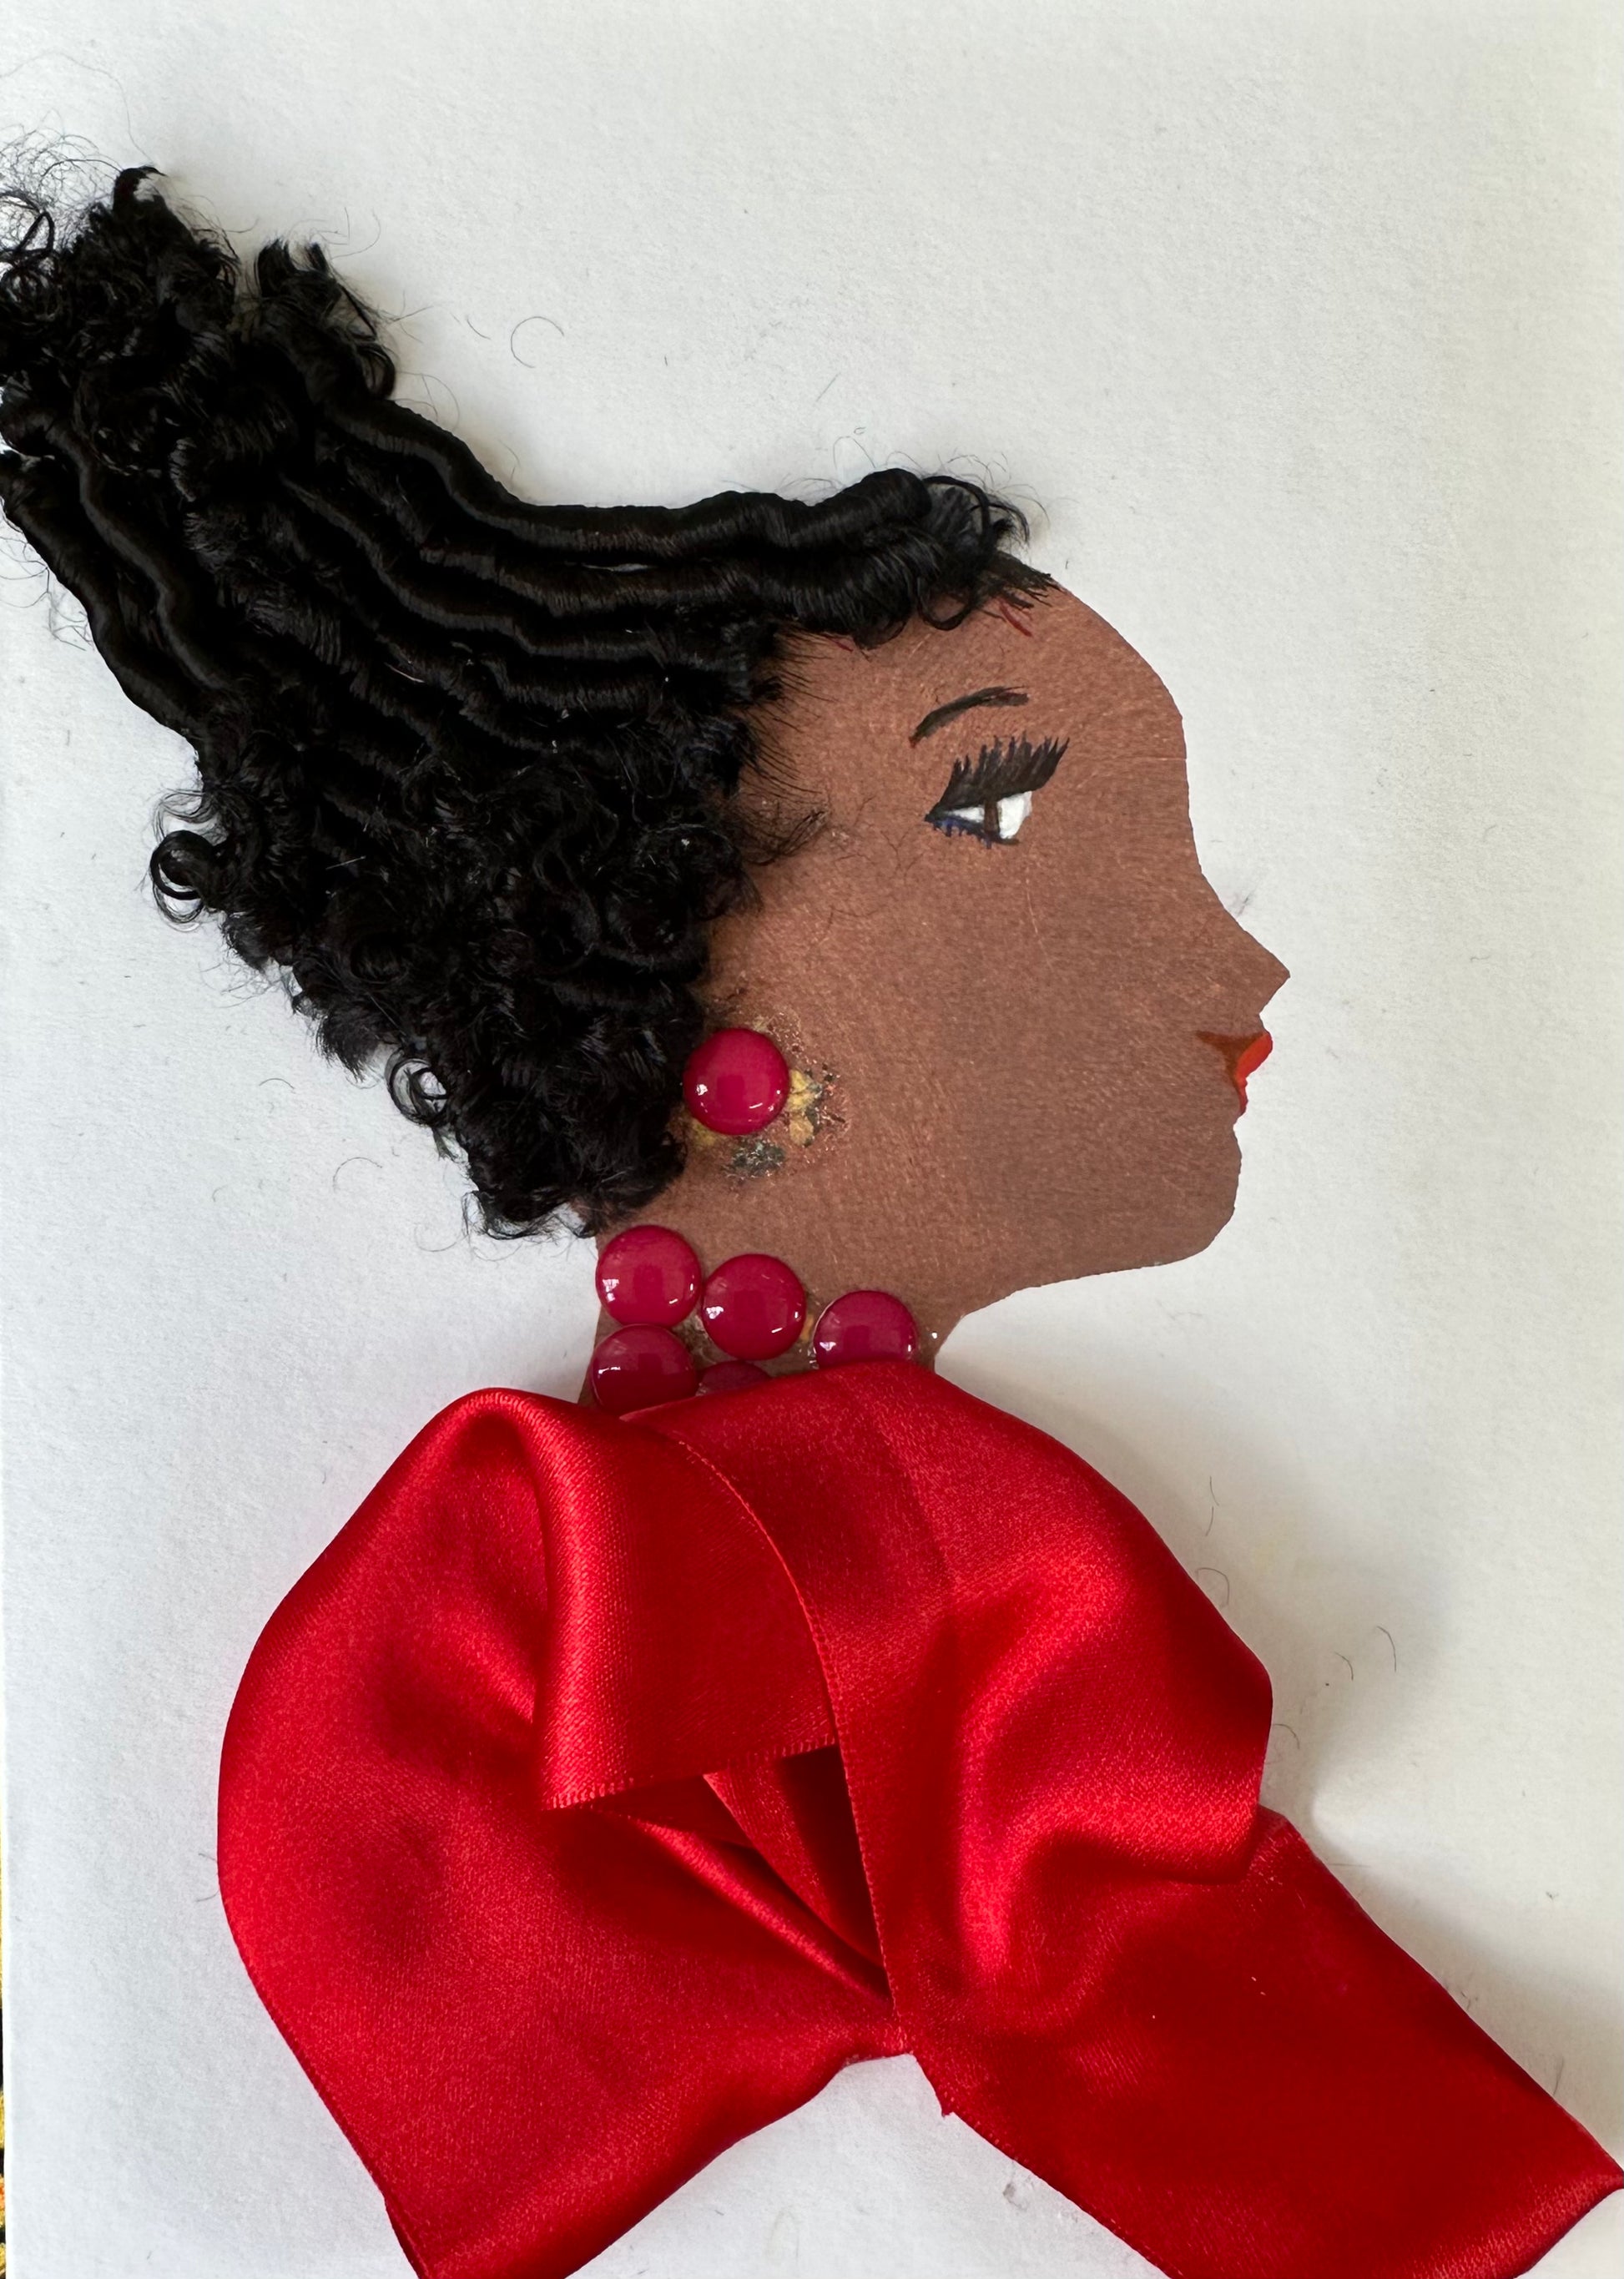 I designed this handmade card of a woman wearing a ruby red, silk-like blouse. She has complimentary red gemstone earrings and necklace.